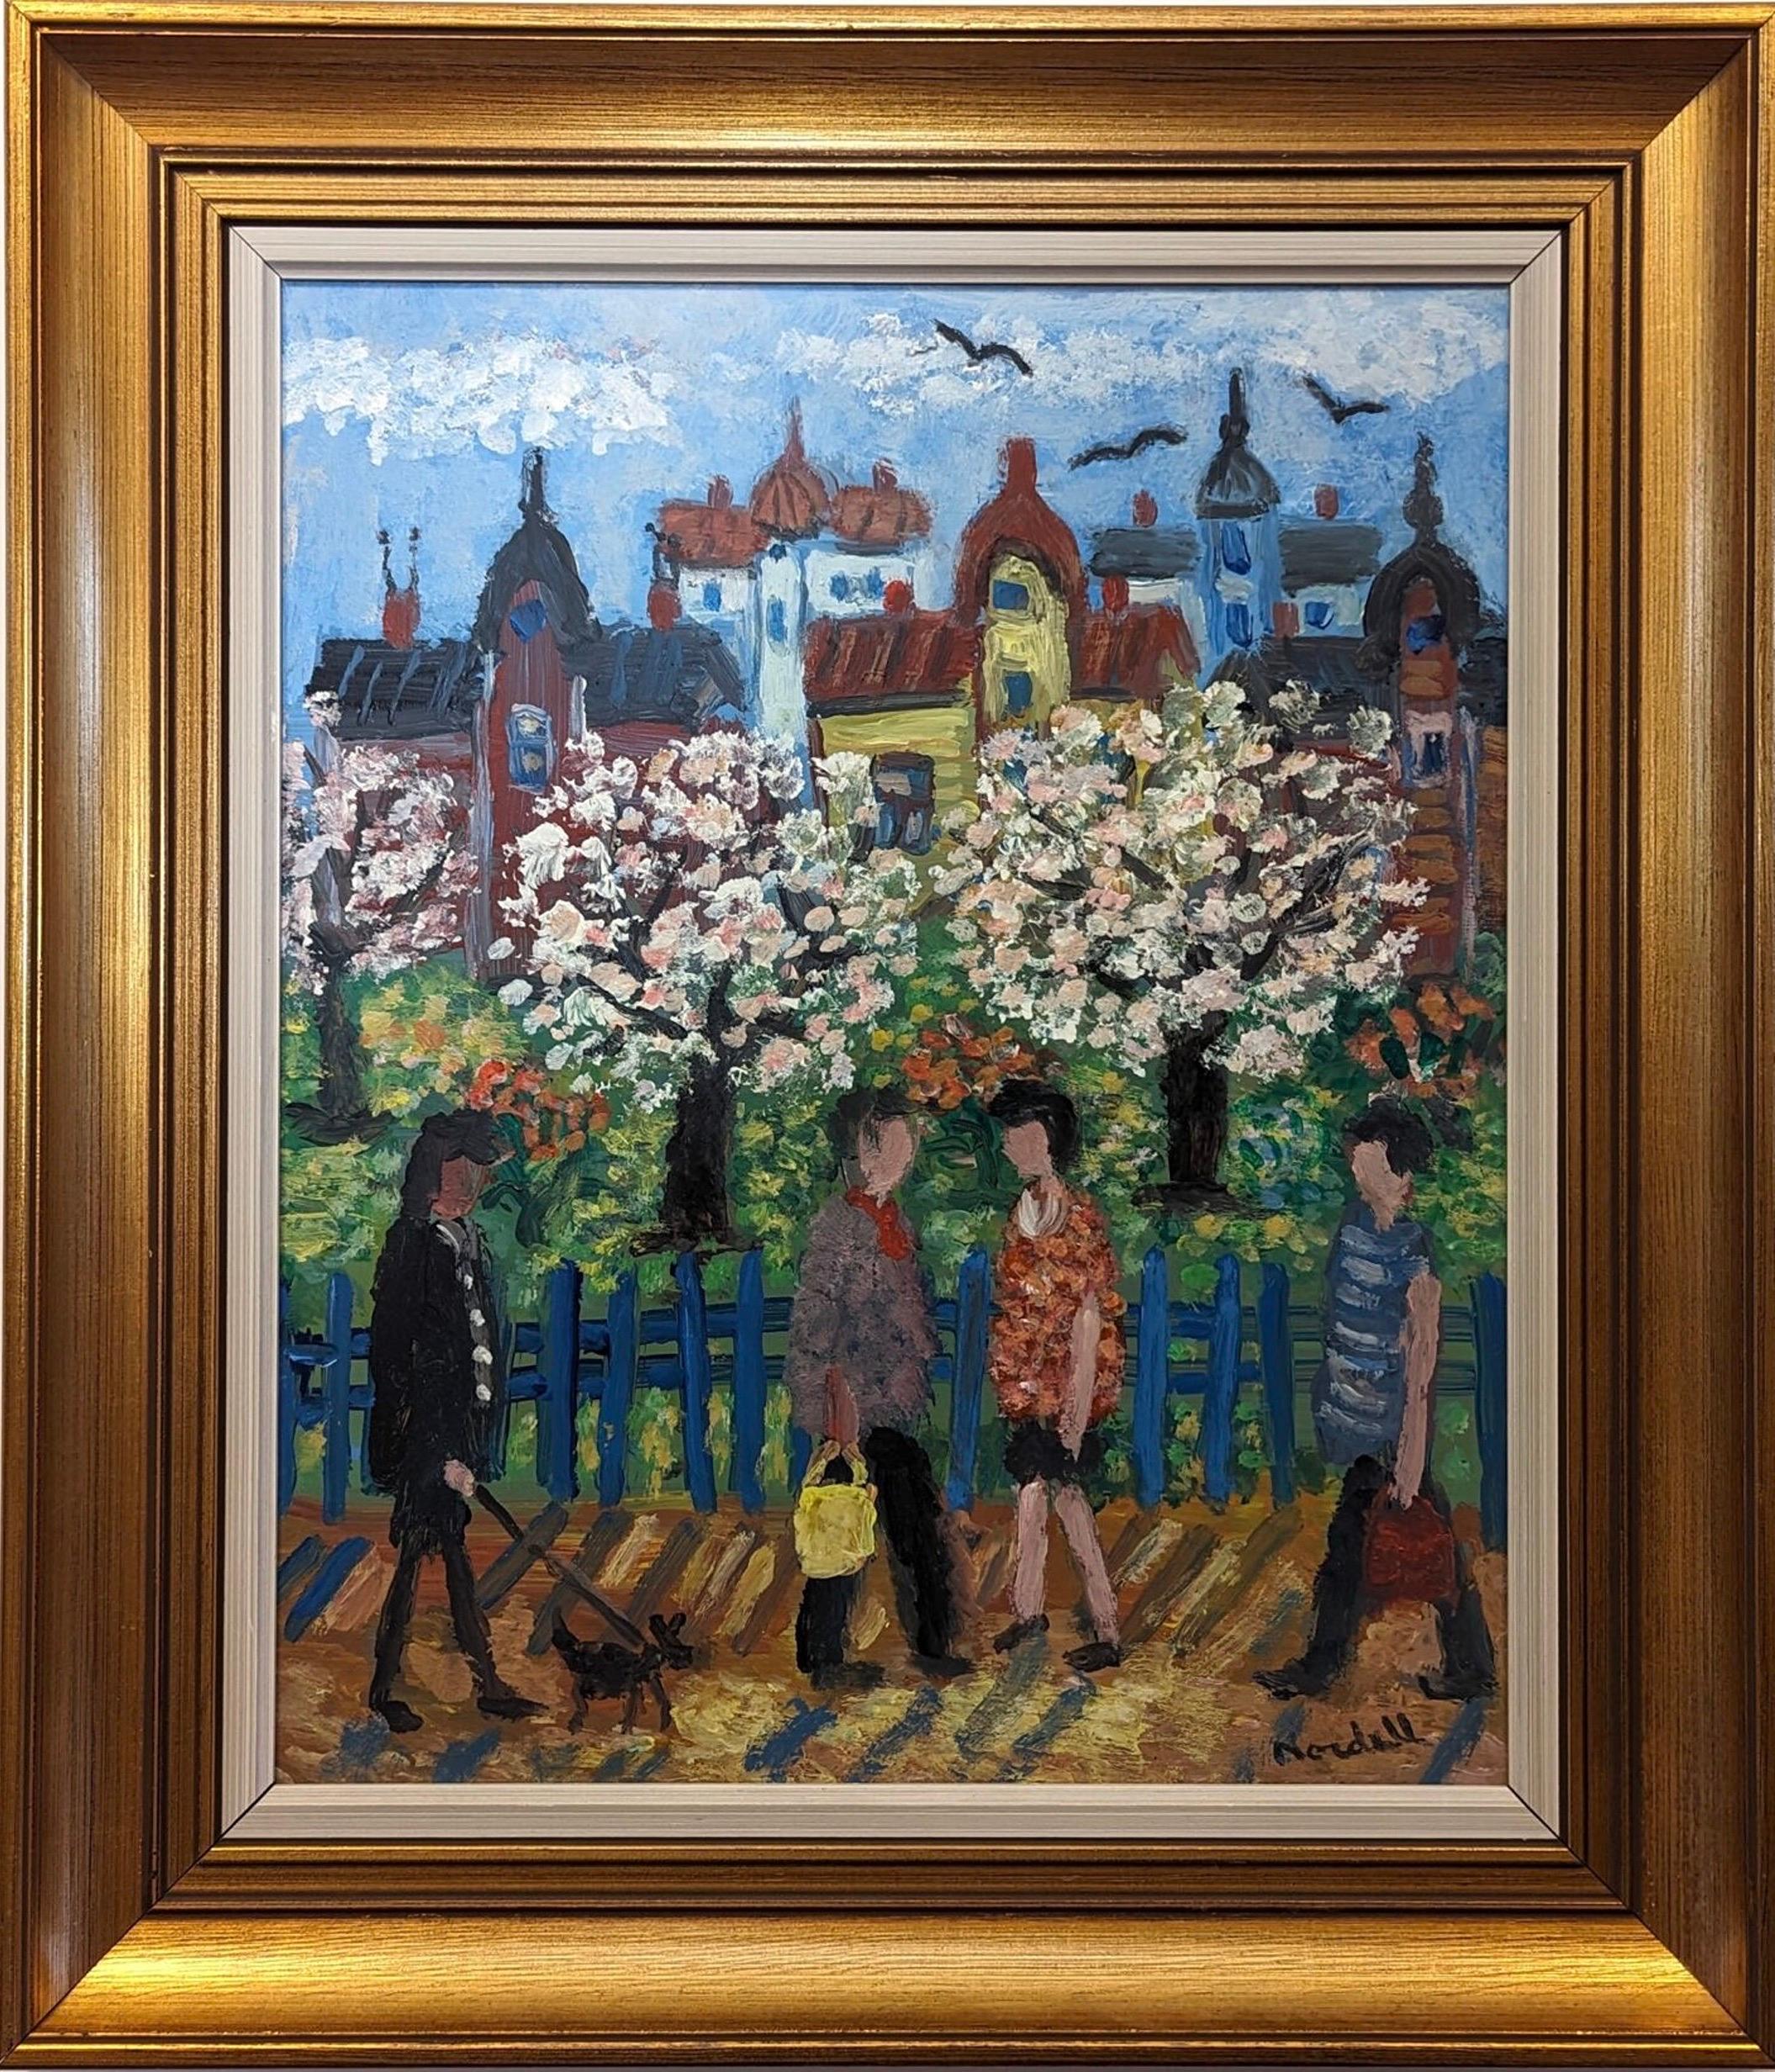 Unknown Figurative Painting - Mid-Century Modern Expressive Street Scene Framed Oil Painting - Crossing Paths